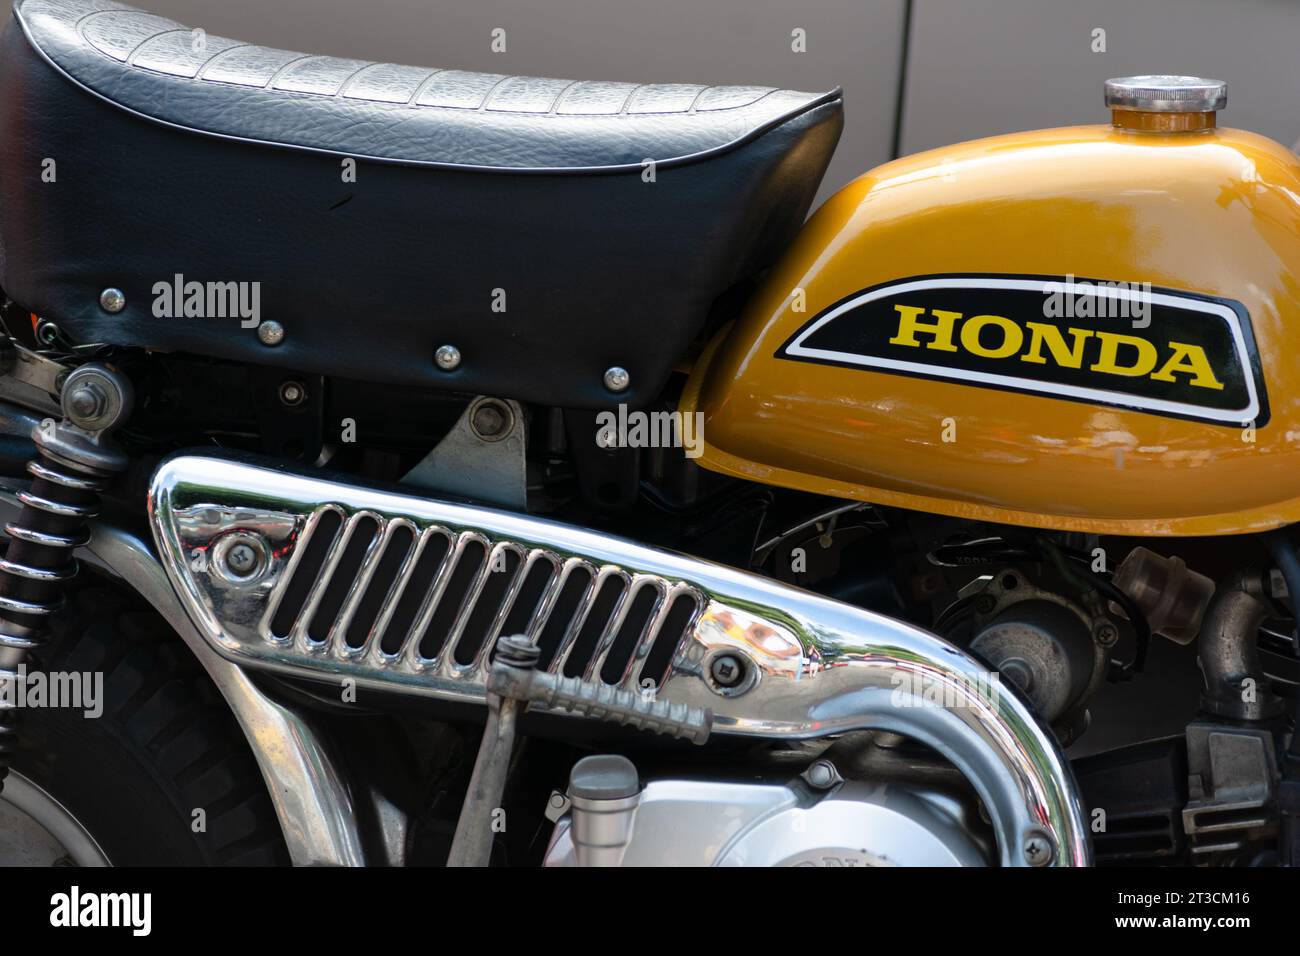 Salvador, Bahia, Brazil - November 1, 2014: Detail of the fuel tank of a 1972 Honda motorcycle is seen at an exhibition of vintage cars in the city of Stock Photo